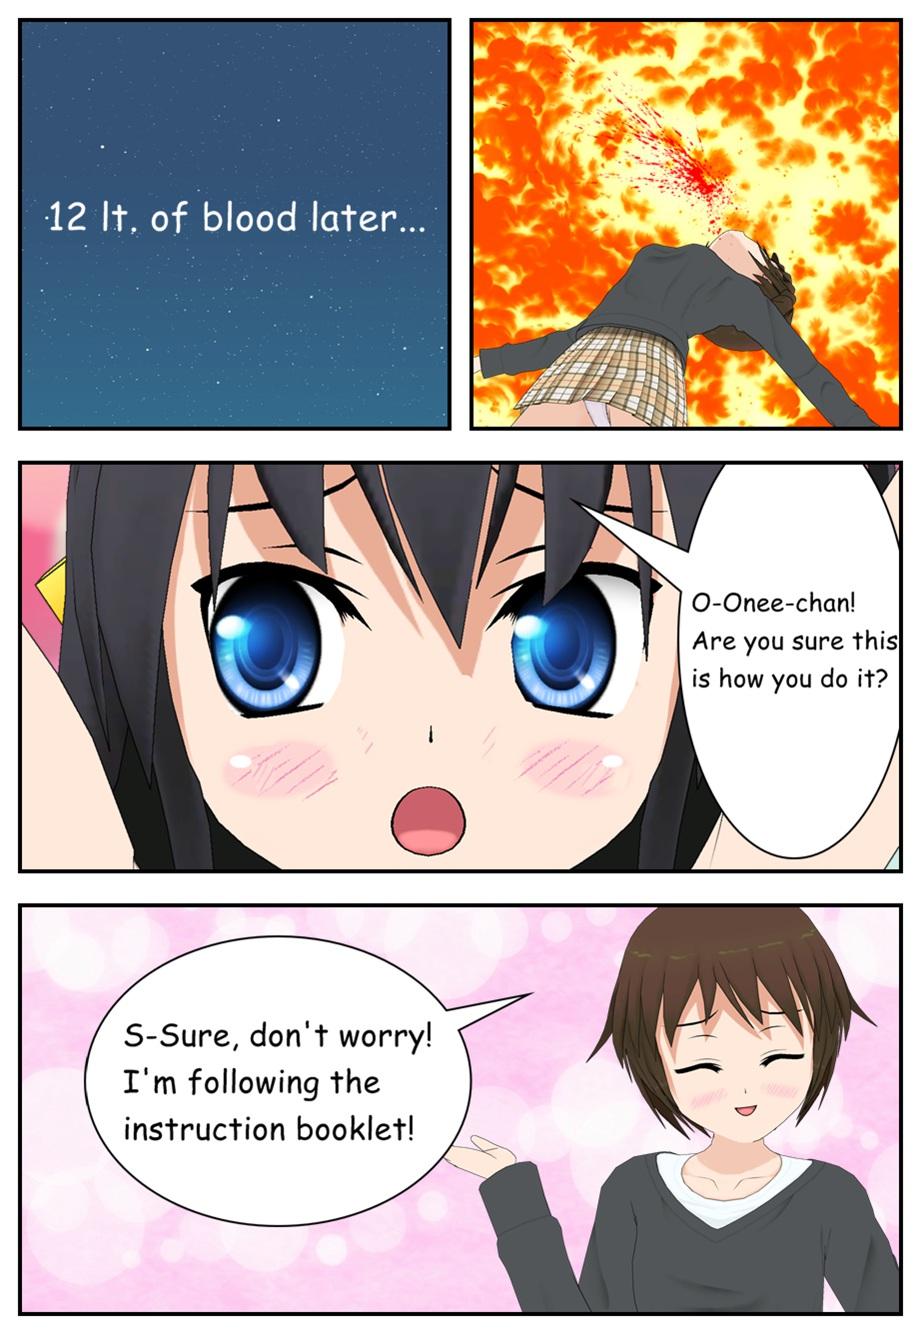 Onee-chan is a perv! 7